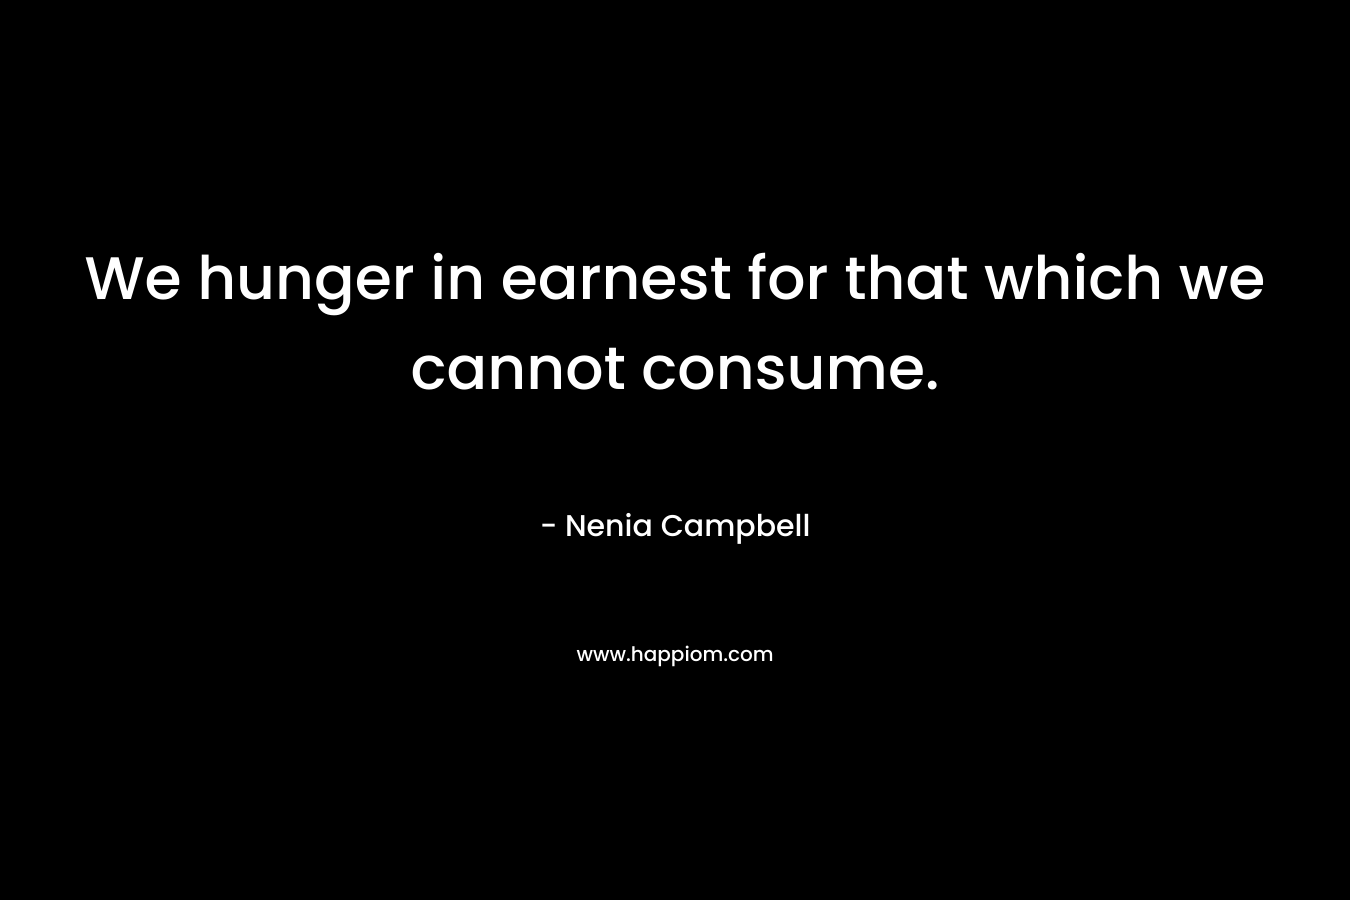 We hunger in earnest for that which we cannot consume. – Nenia Campbell